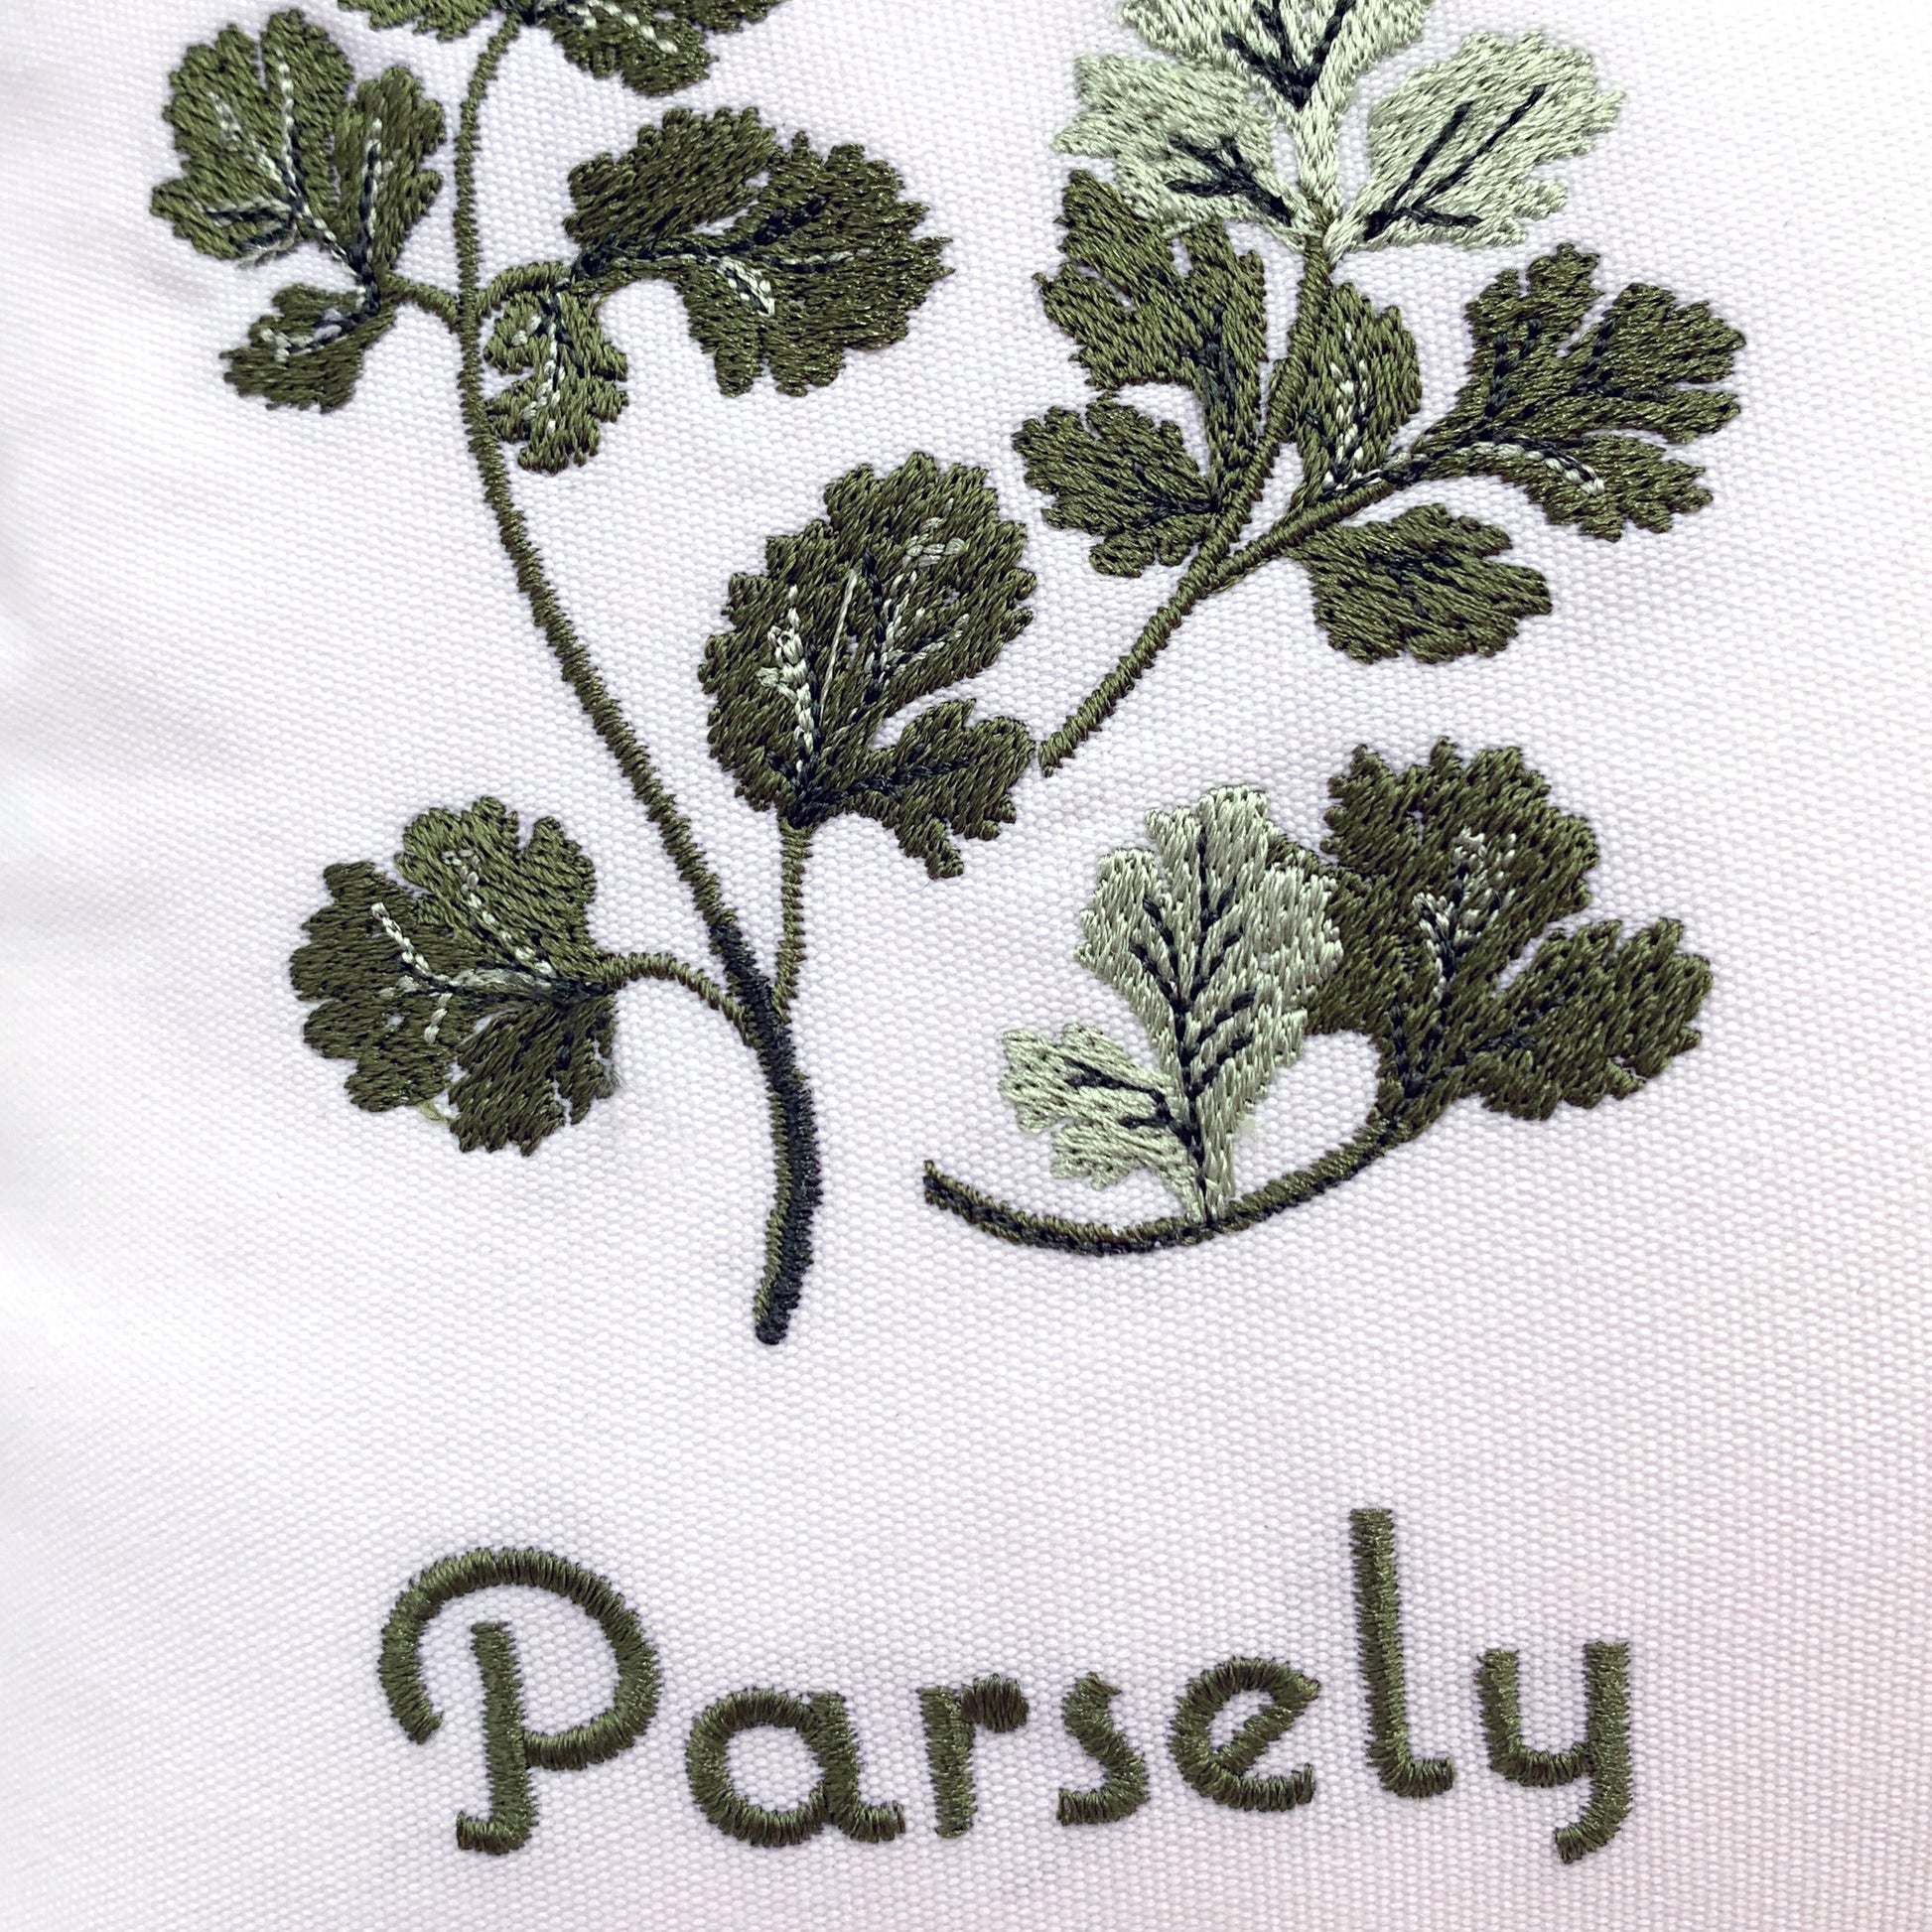 Detail shot of the Herb Garden pillows embroidery